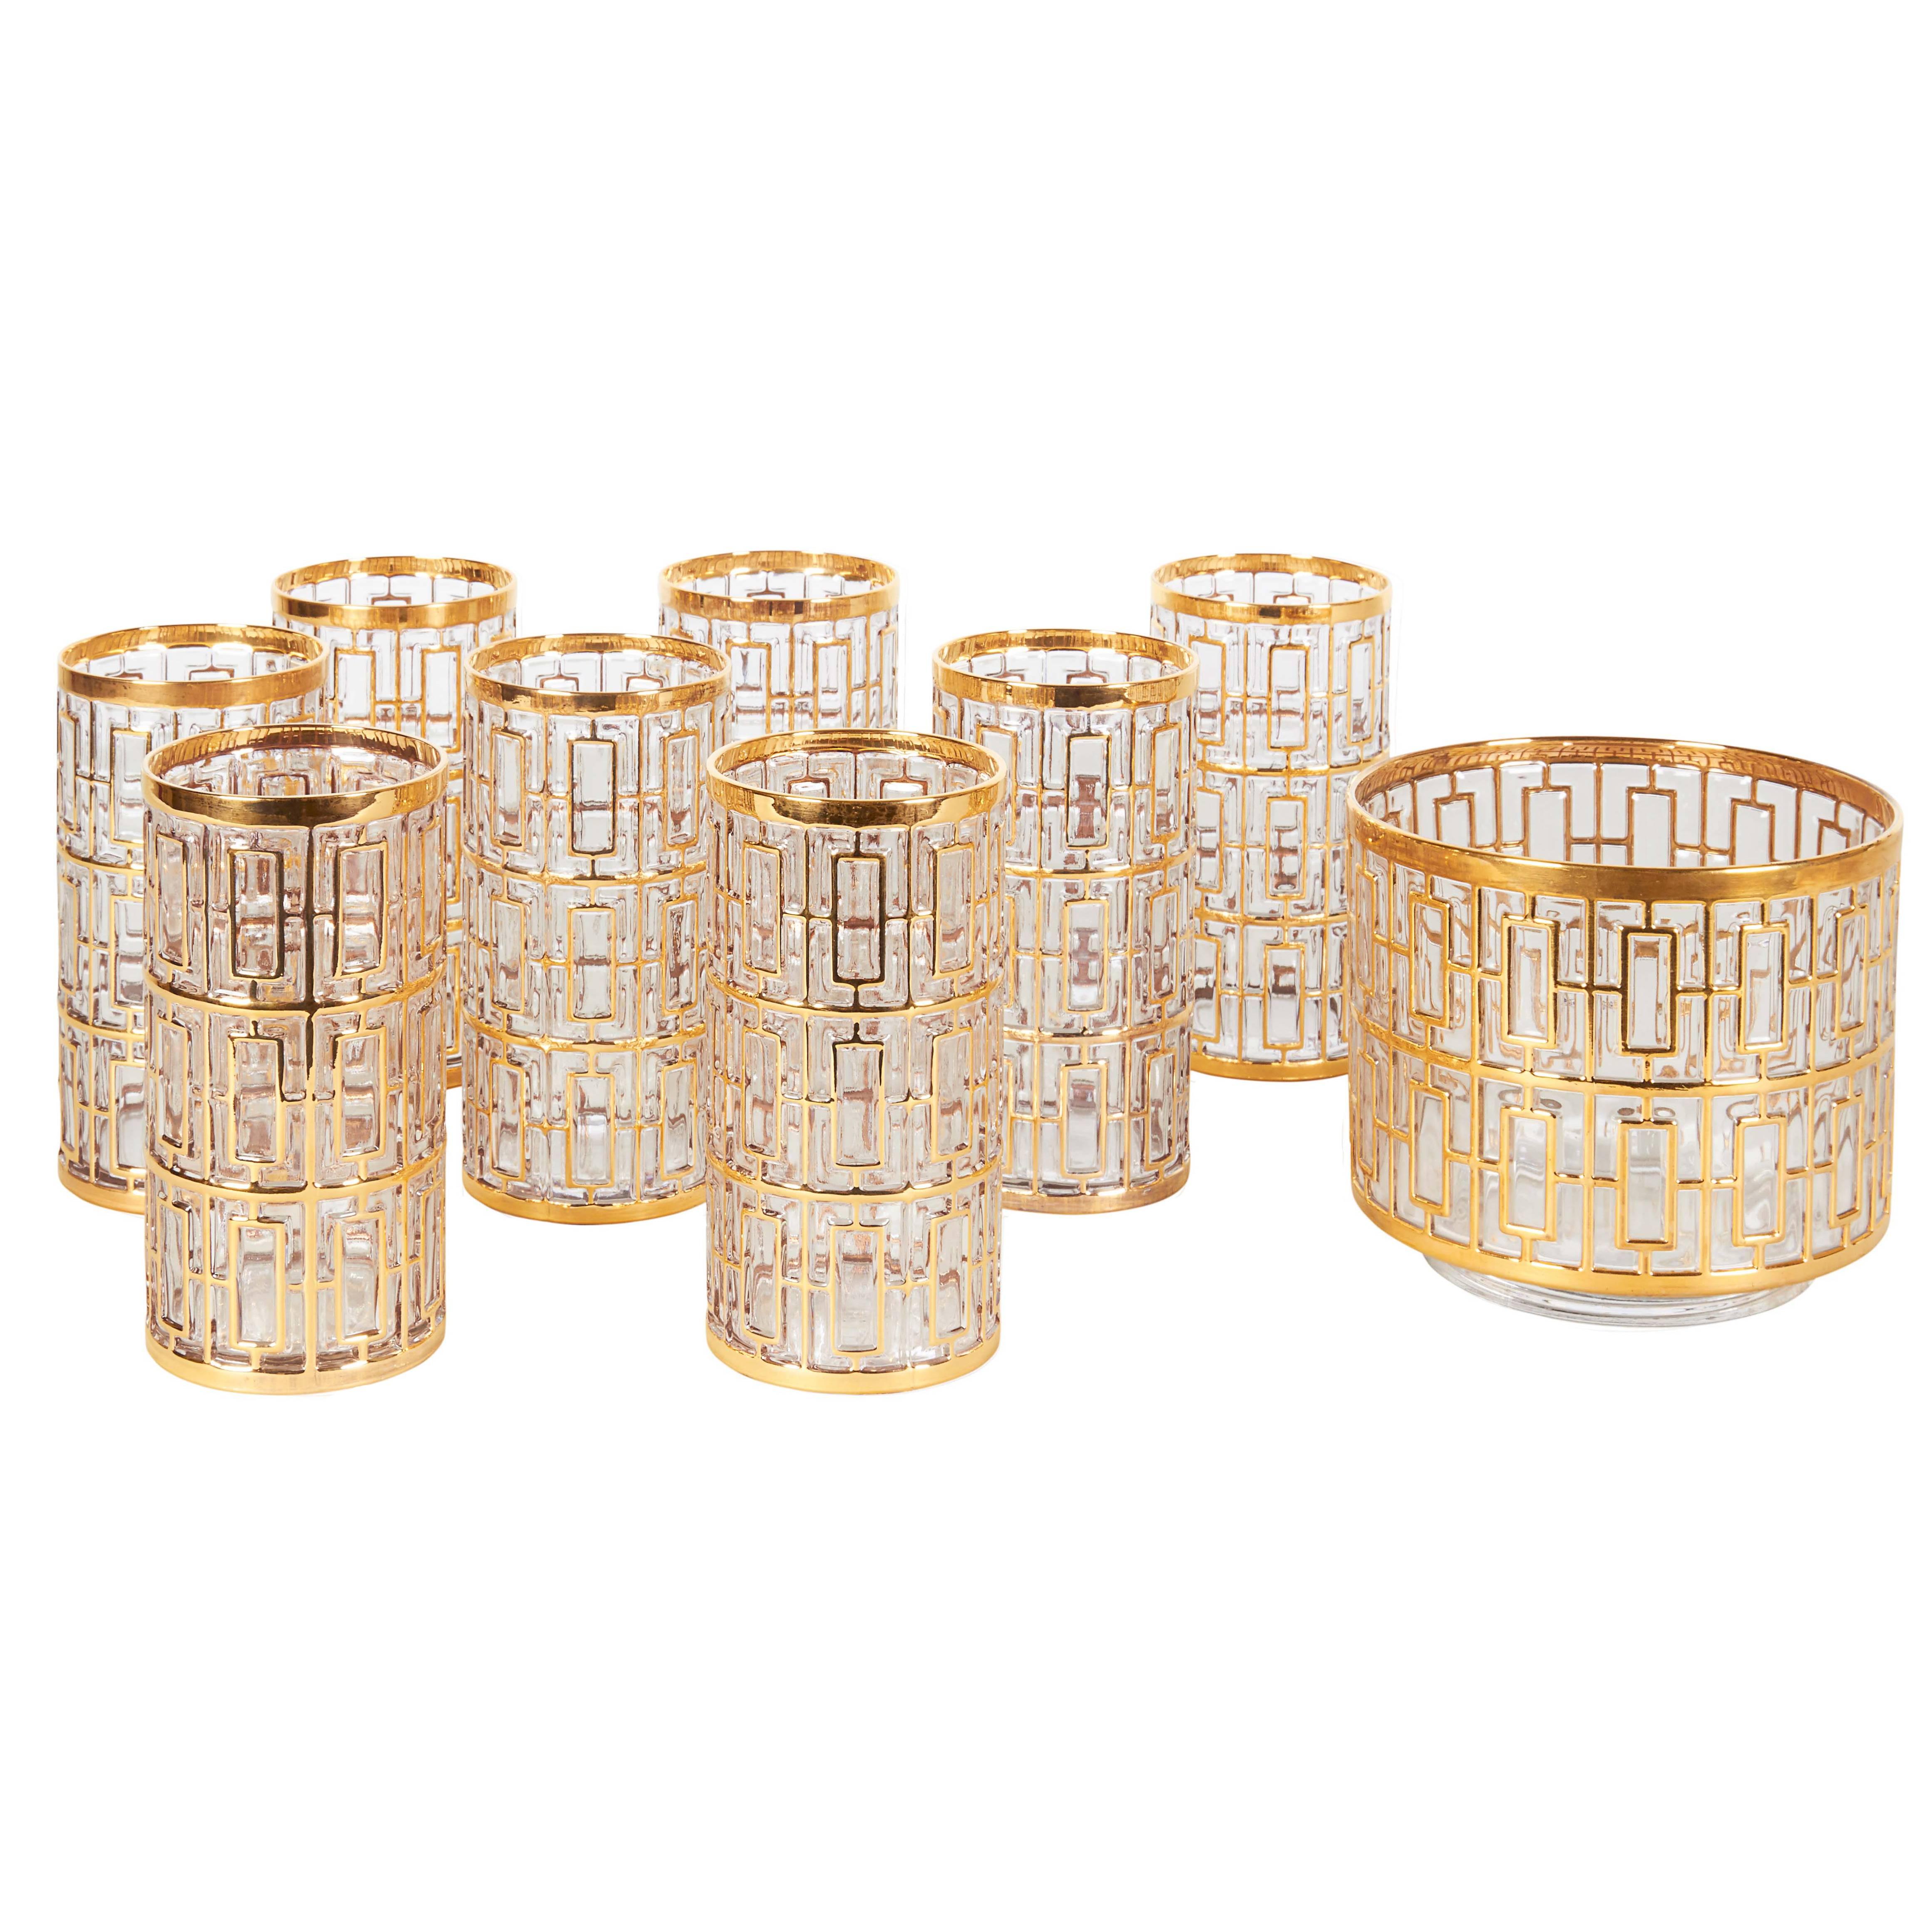 A set of eight Asian inspired highball glasses, produced circa 1960s-1970s by the Imperial Glass Company, each with 22-karat gold Shoji fretwork detailing. Markings include the Imperial Glass hallmark, to the underside of each glass. These highball